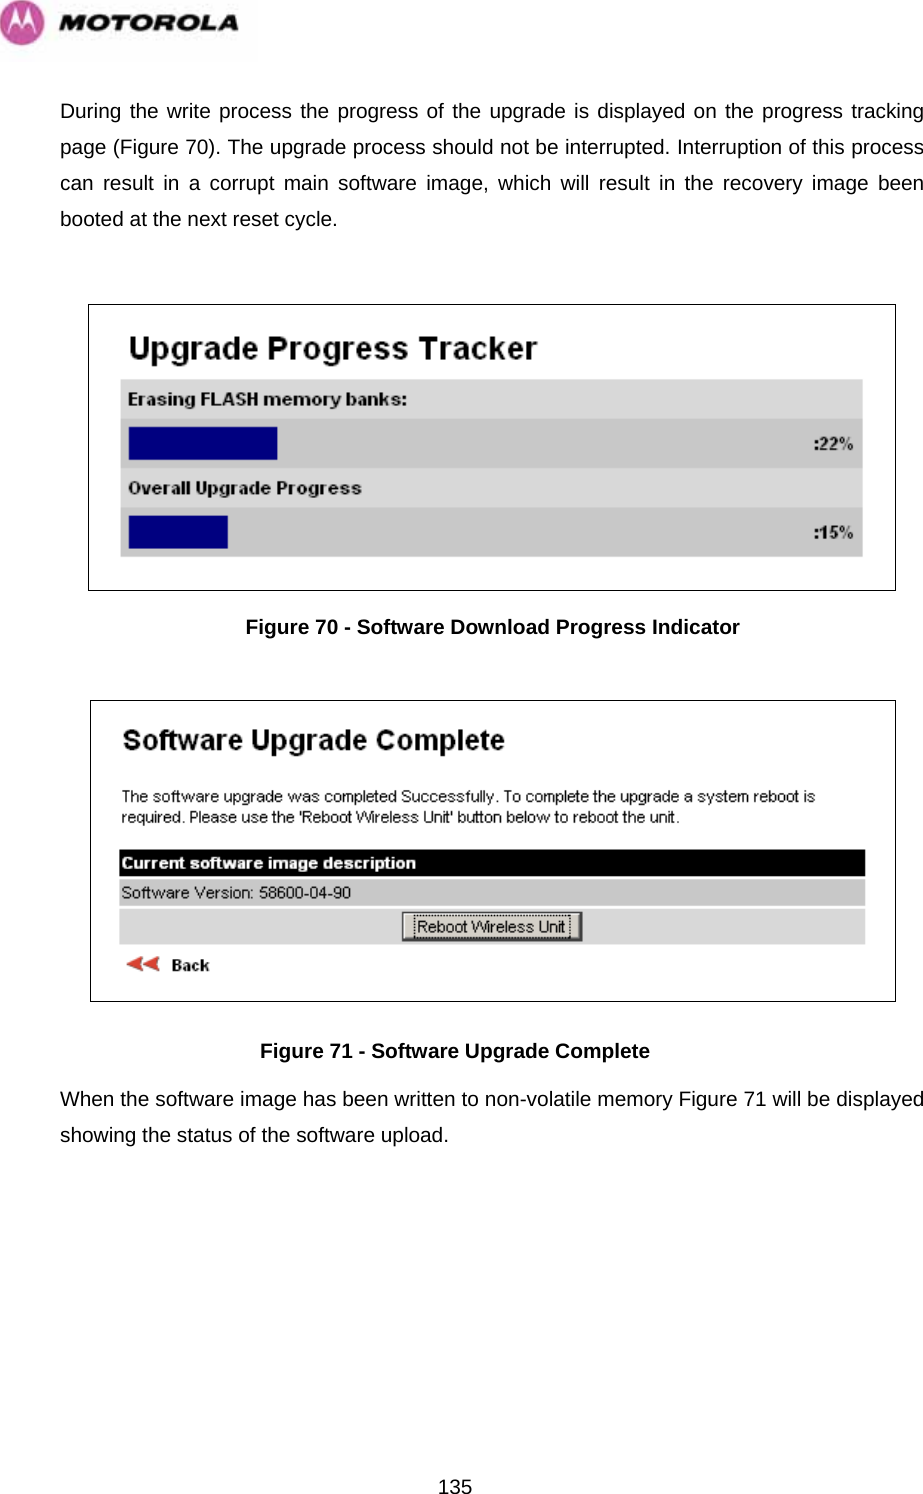   135During the write process the progress of the upgrade is displayed on the progress tracking page (Figure 70). The upgrade process should not be interrupted. Interruption of this process can result in a corrupt main software image, which will result in the recovery image been booted at the next reset cycle.   Figure 70 - Software Download Progress Indicator   Figure 71 - Software Upgrade Complete  When the software image has been written to non-volatile memory Figure 71 will be displayed showing the status of the software upload. 